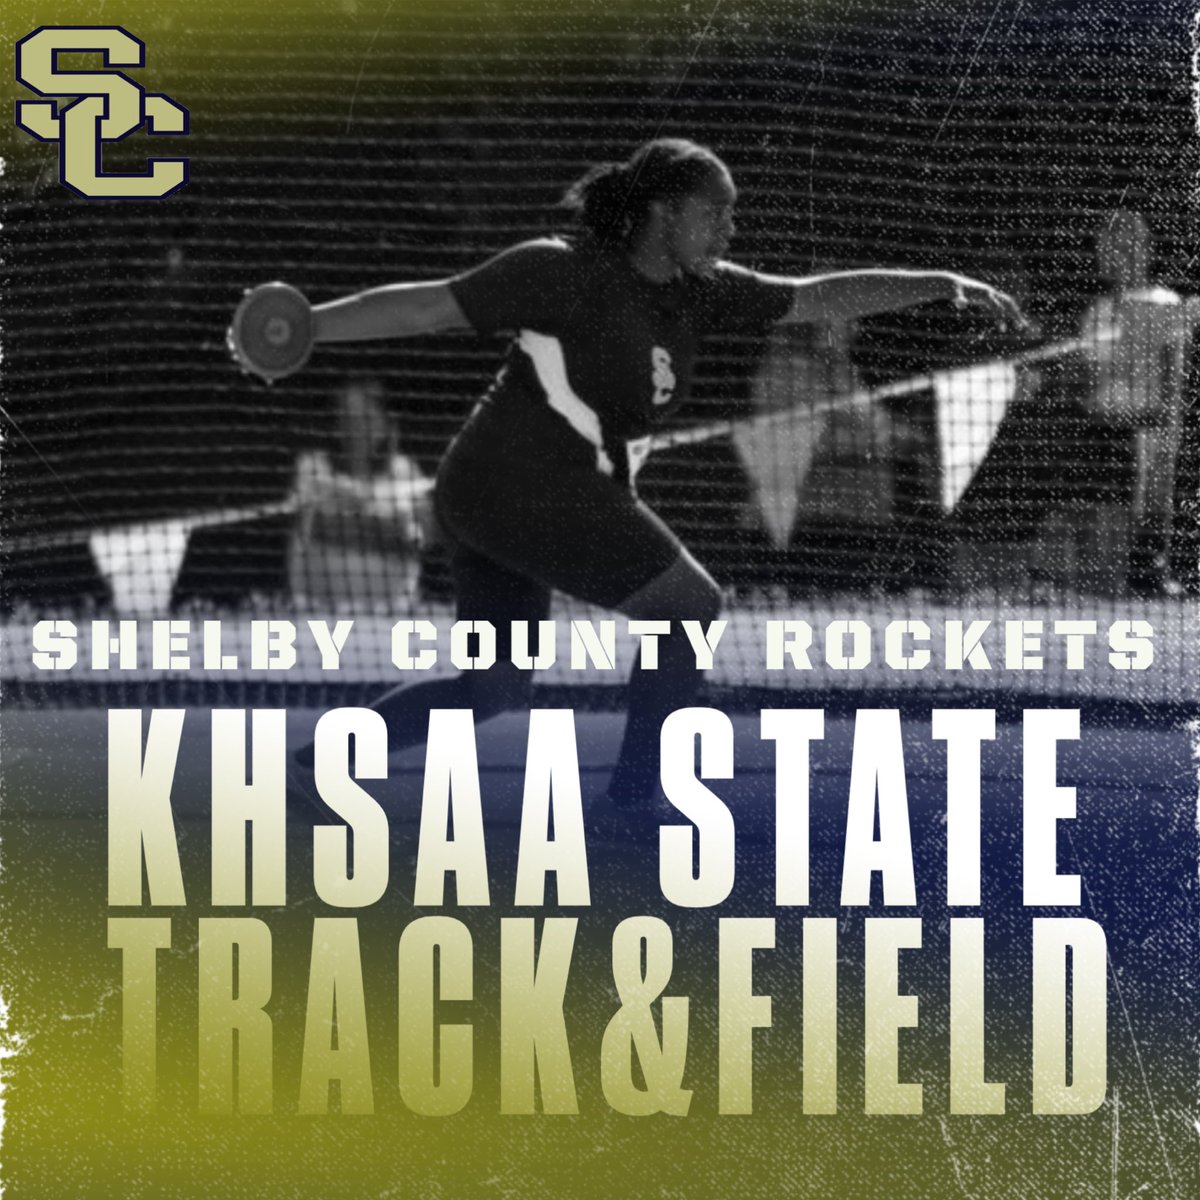 The Track has closed for warmups and the KHSAA STATE TRACK MEET is just about to get going!! Good Luck to OUR ROCKETS competing today!! #ALLForTheROCKETS @SCPS_Activities @ShelbyField @shelbycountysch